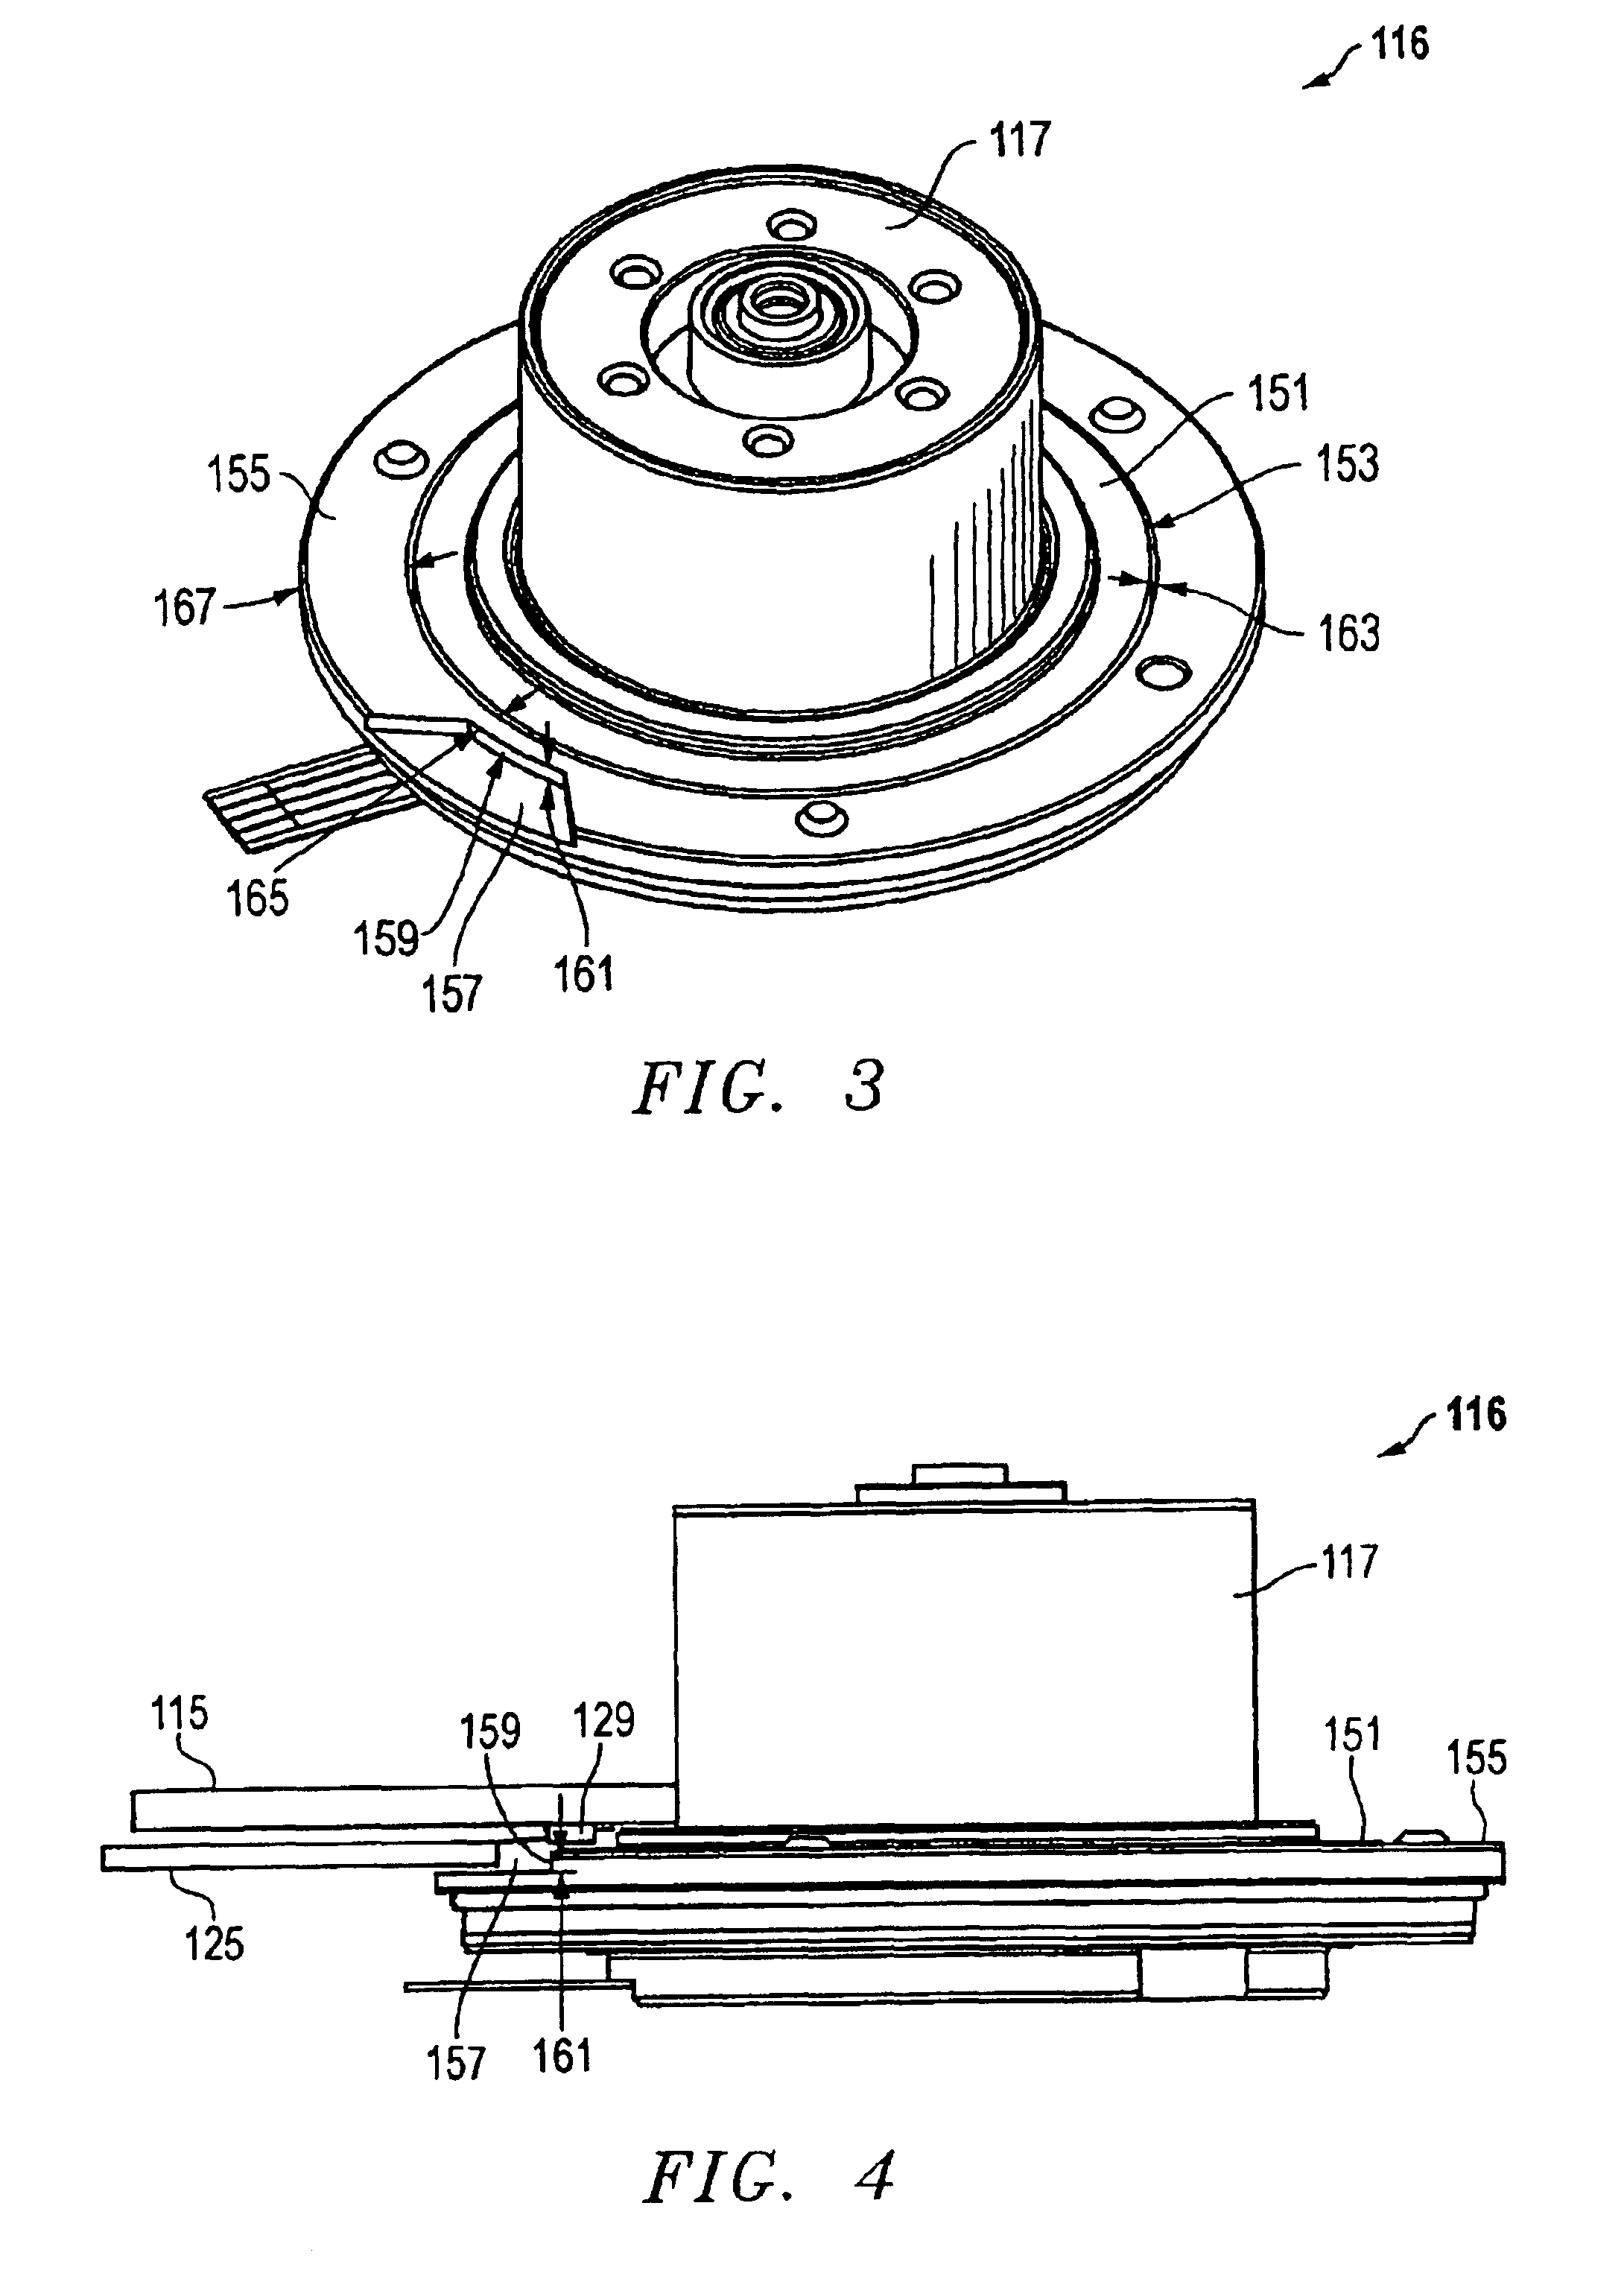 Method of attenuating airflow disturbances in a hard disk drive with a circumferential motor bracket shroud for motor hub flange outside diameter